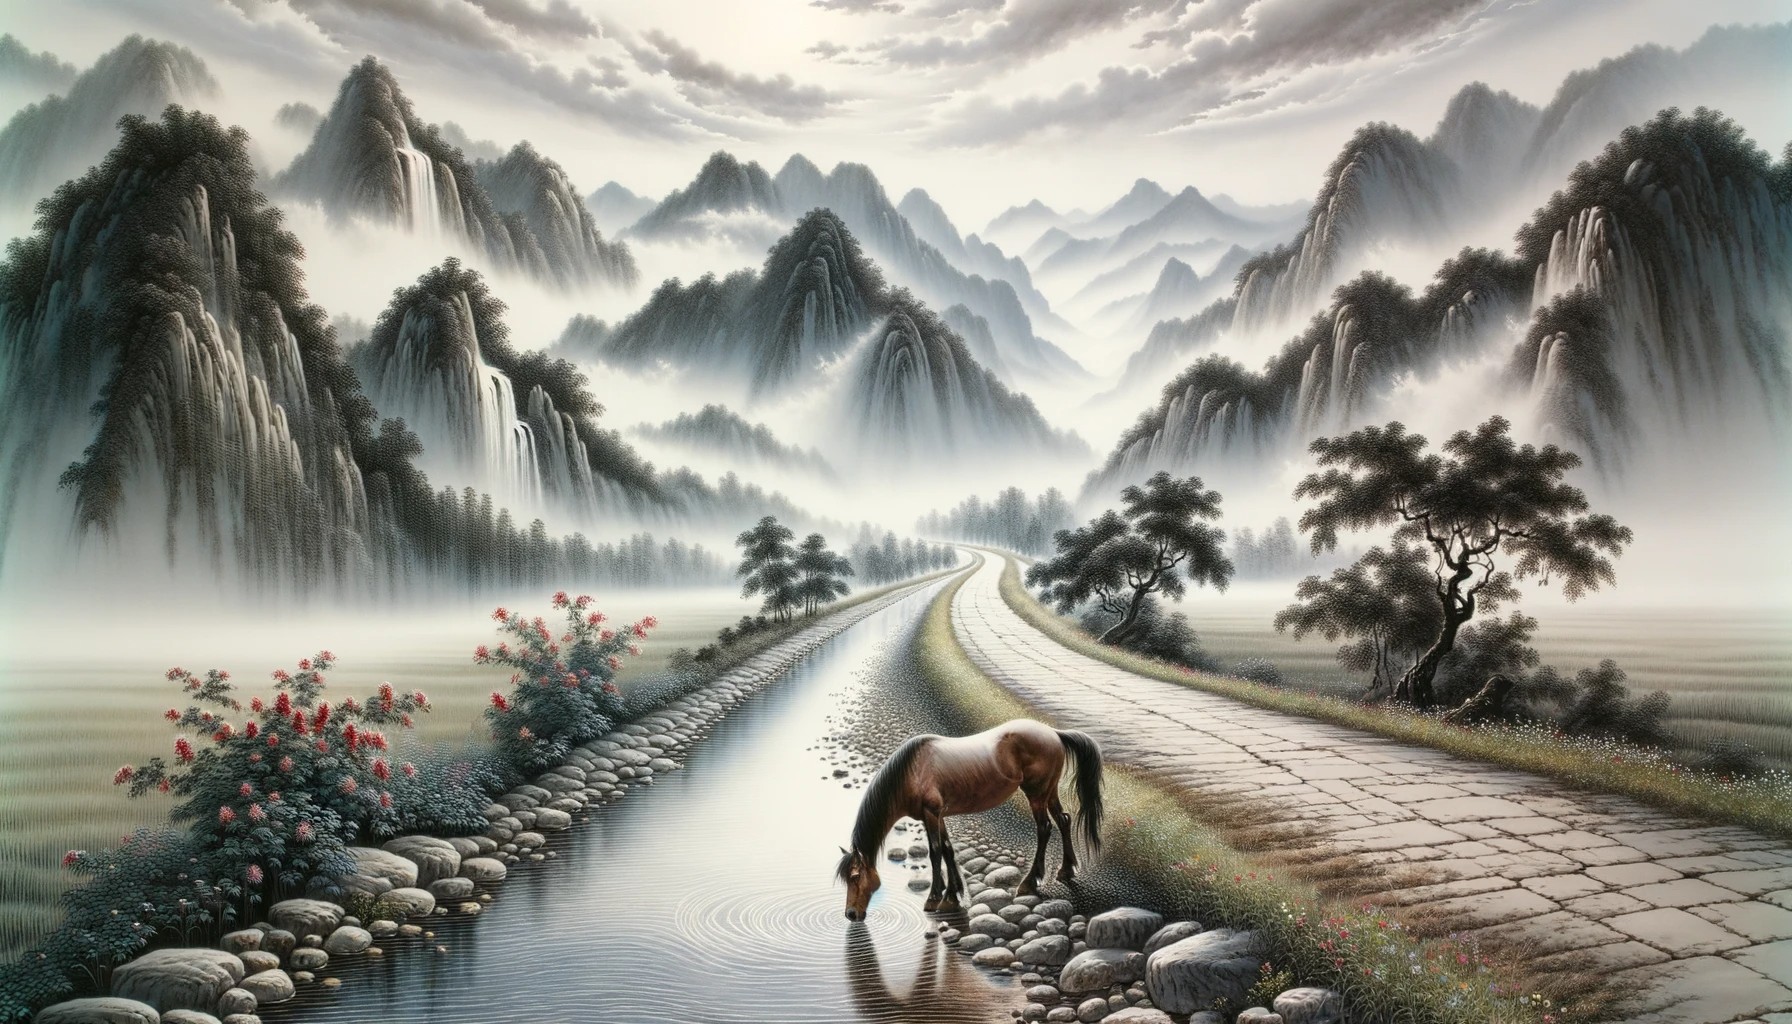 Chinese ink painting capturing a serene moment on an ancient road by dalle 3